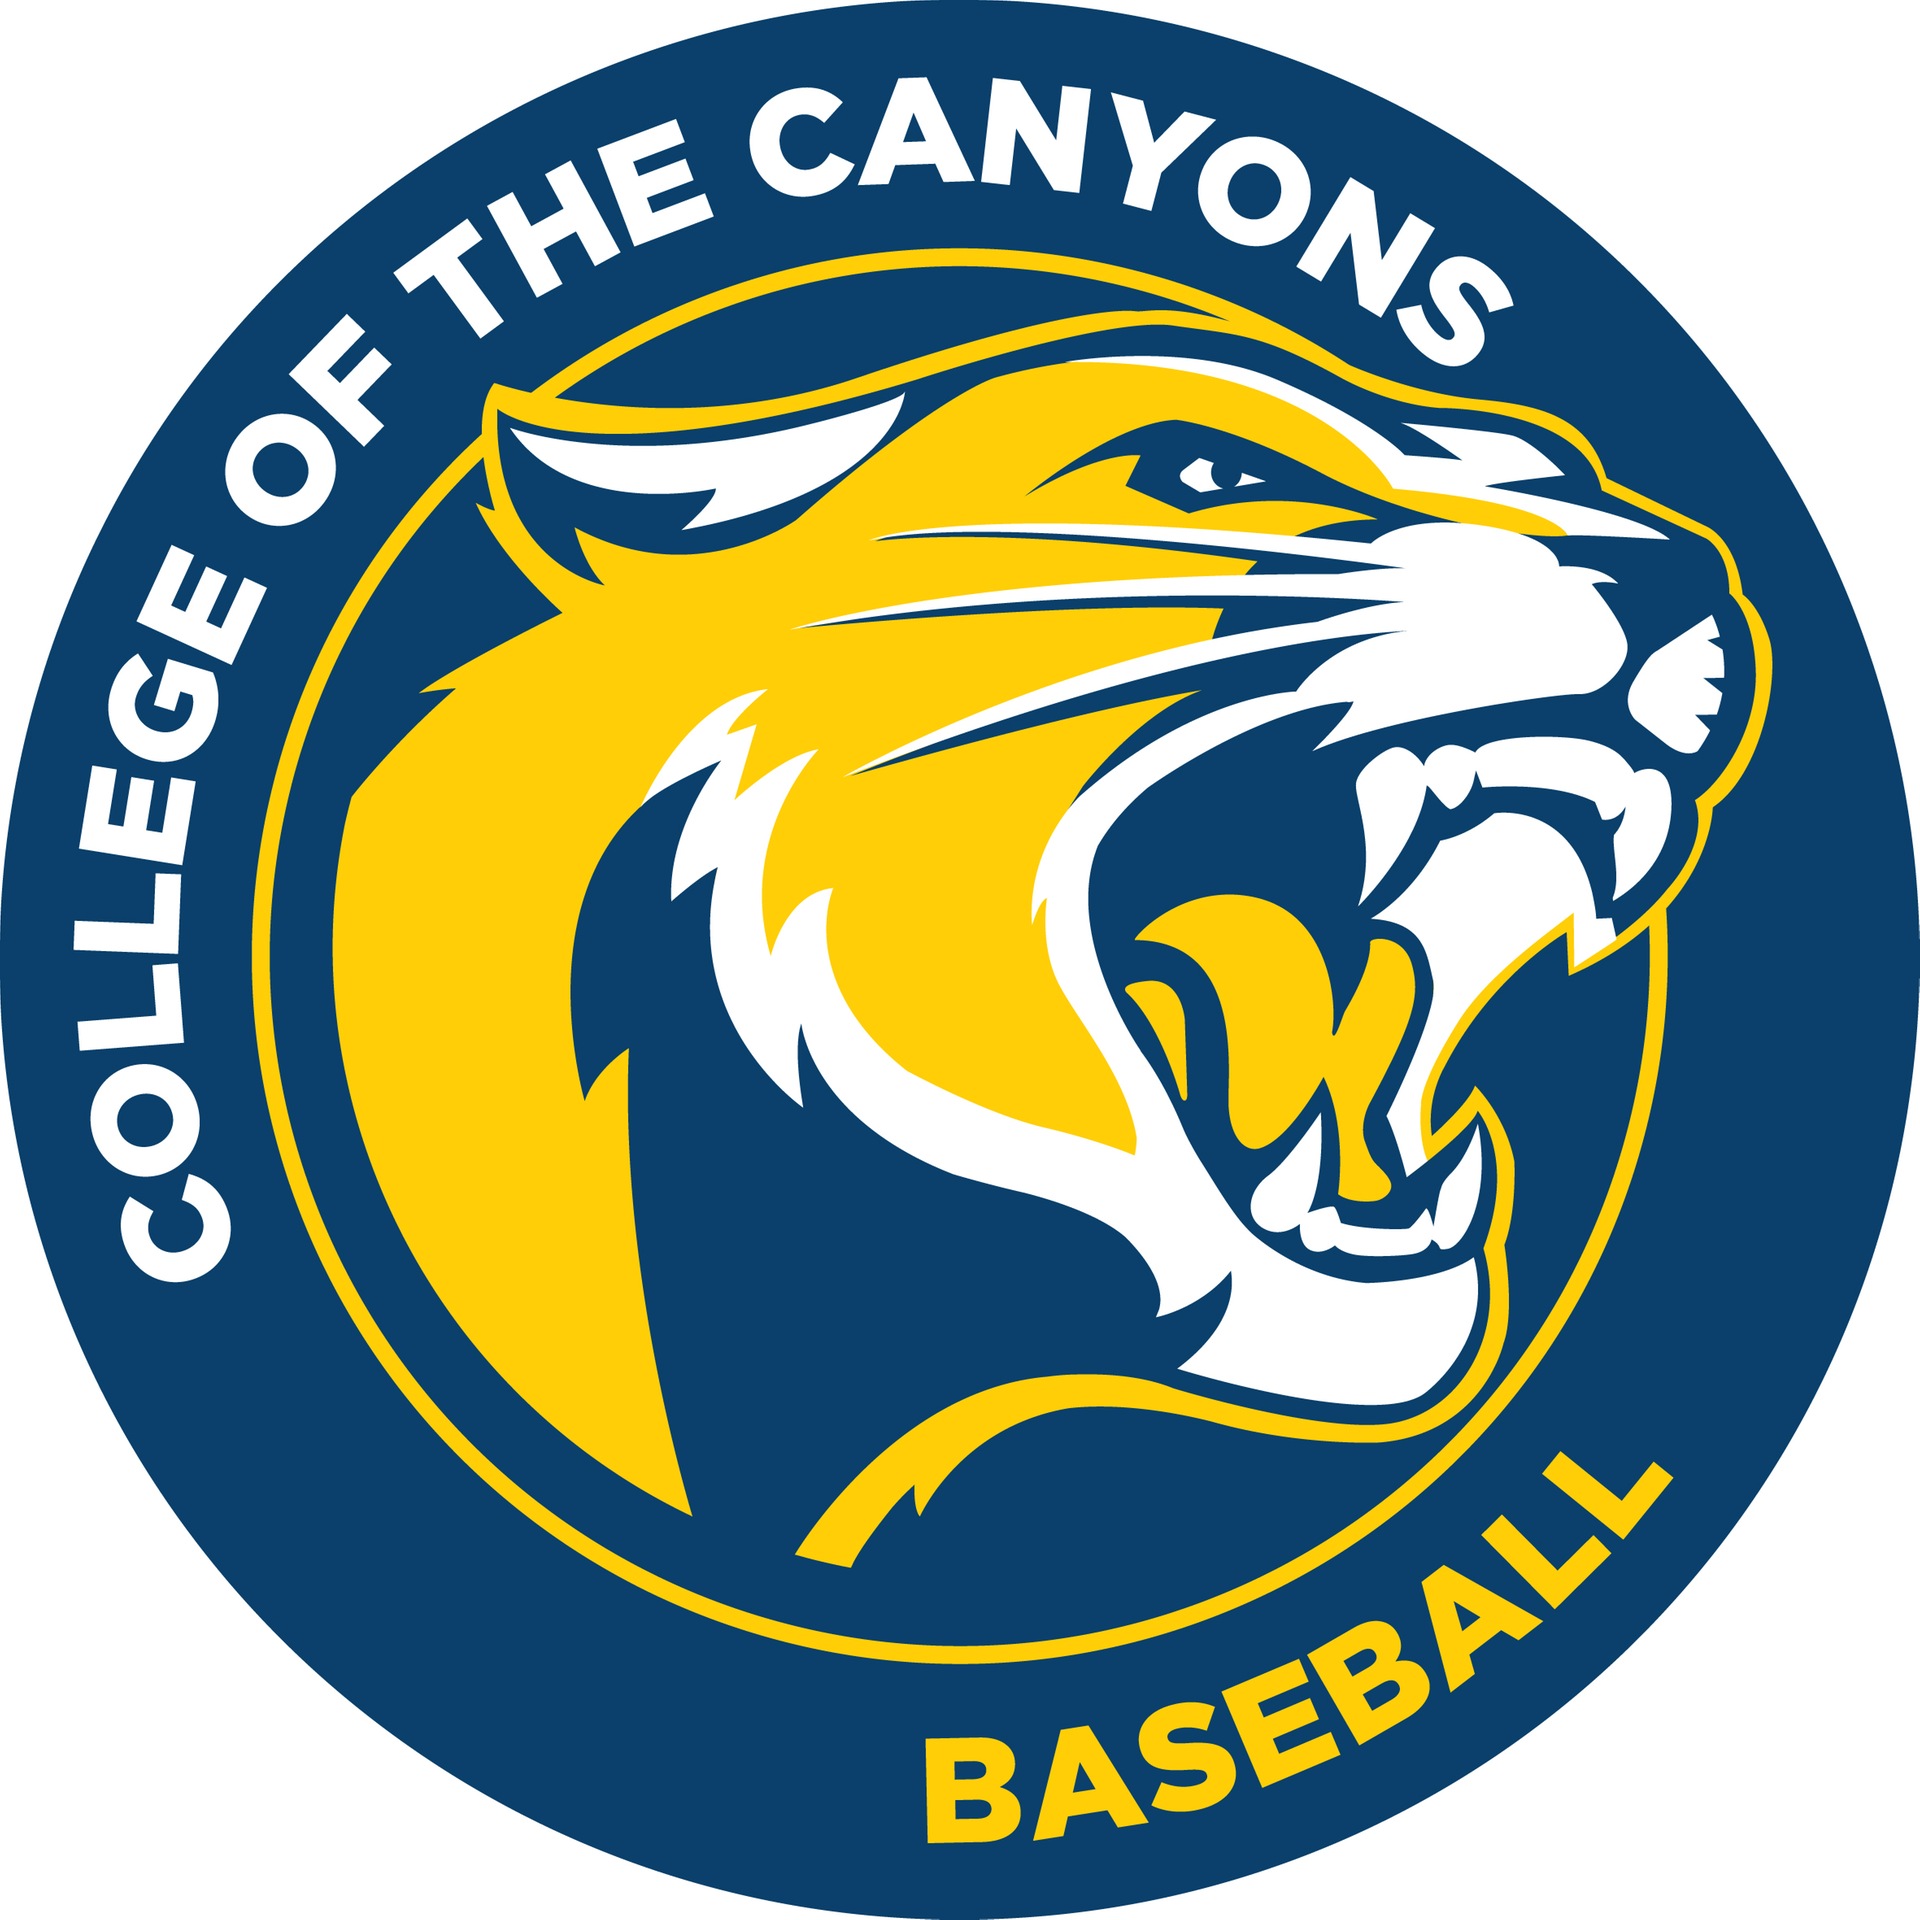 College of the Canyons baseball logo.